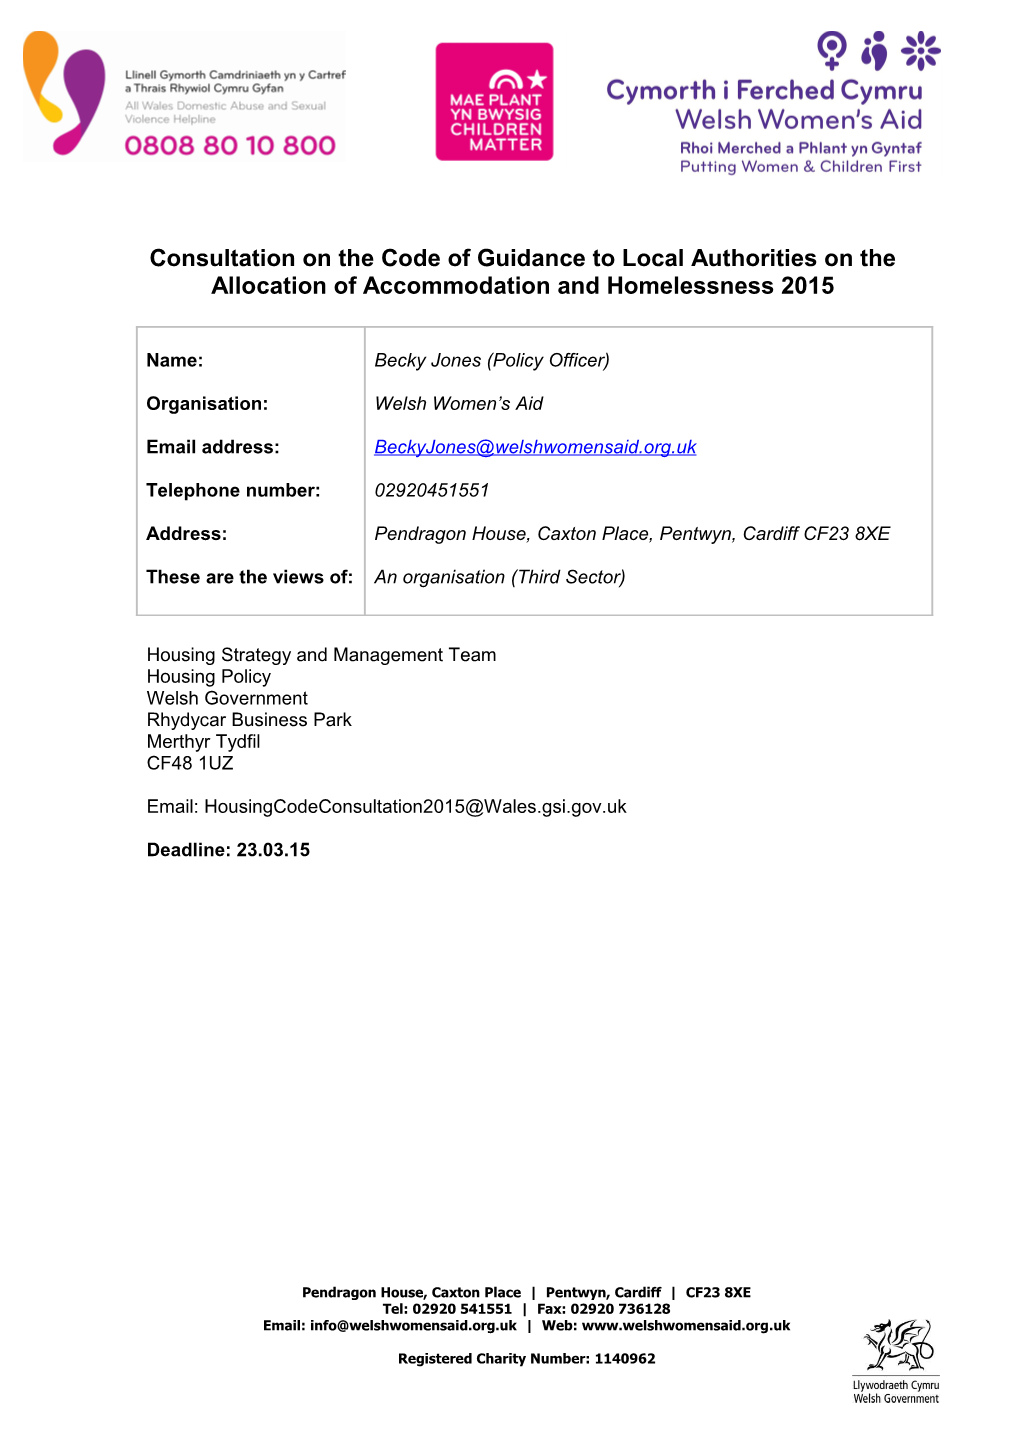 Consultation on the Code of Guidance to Local Authorities on the Allocation of Accommodation